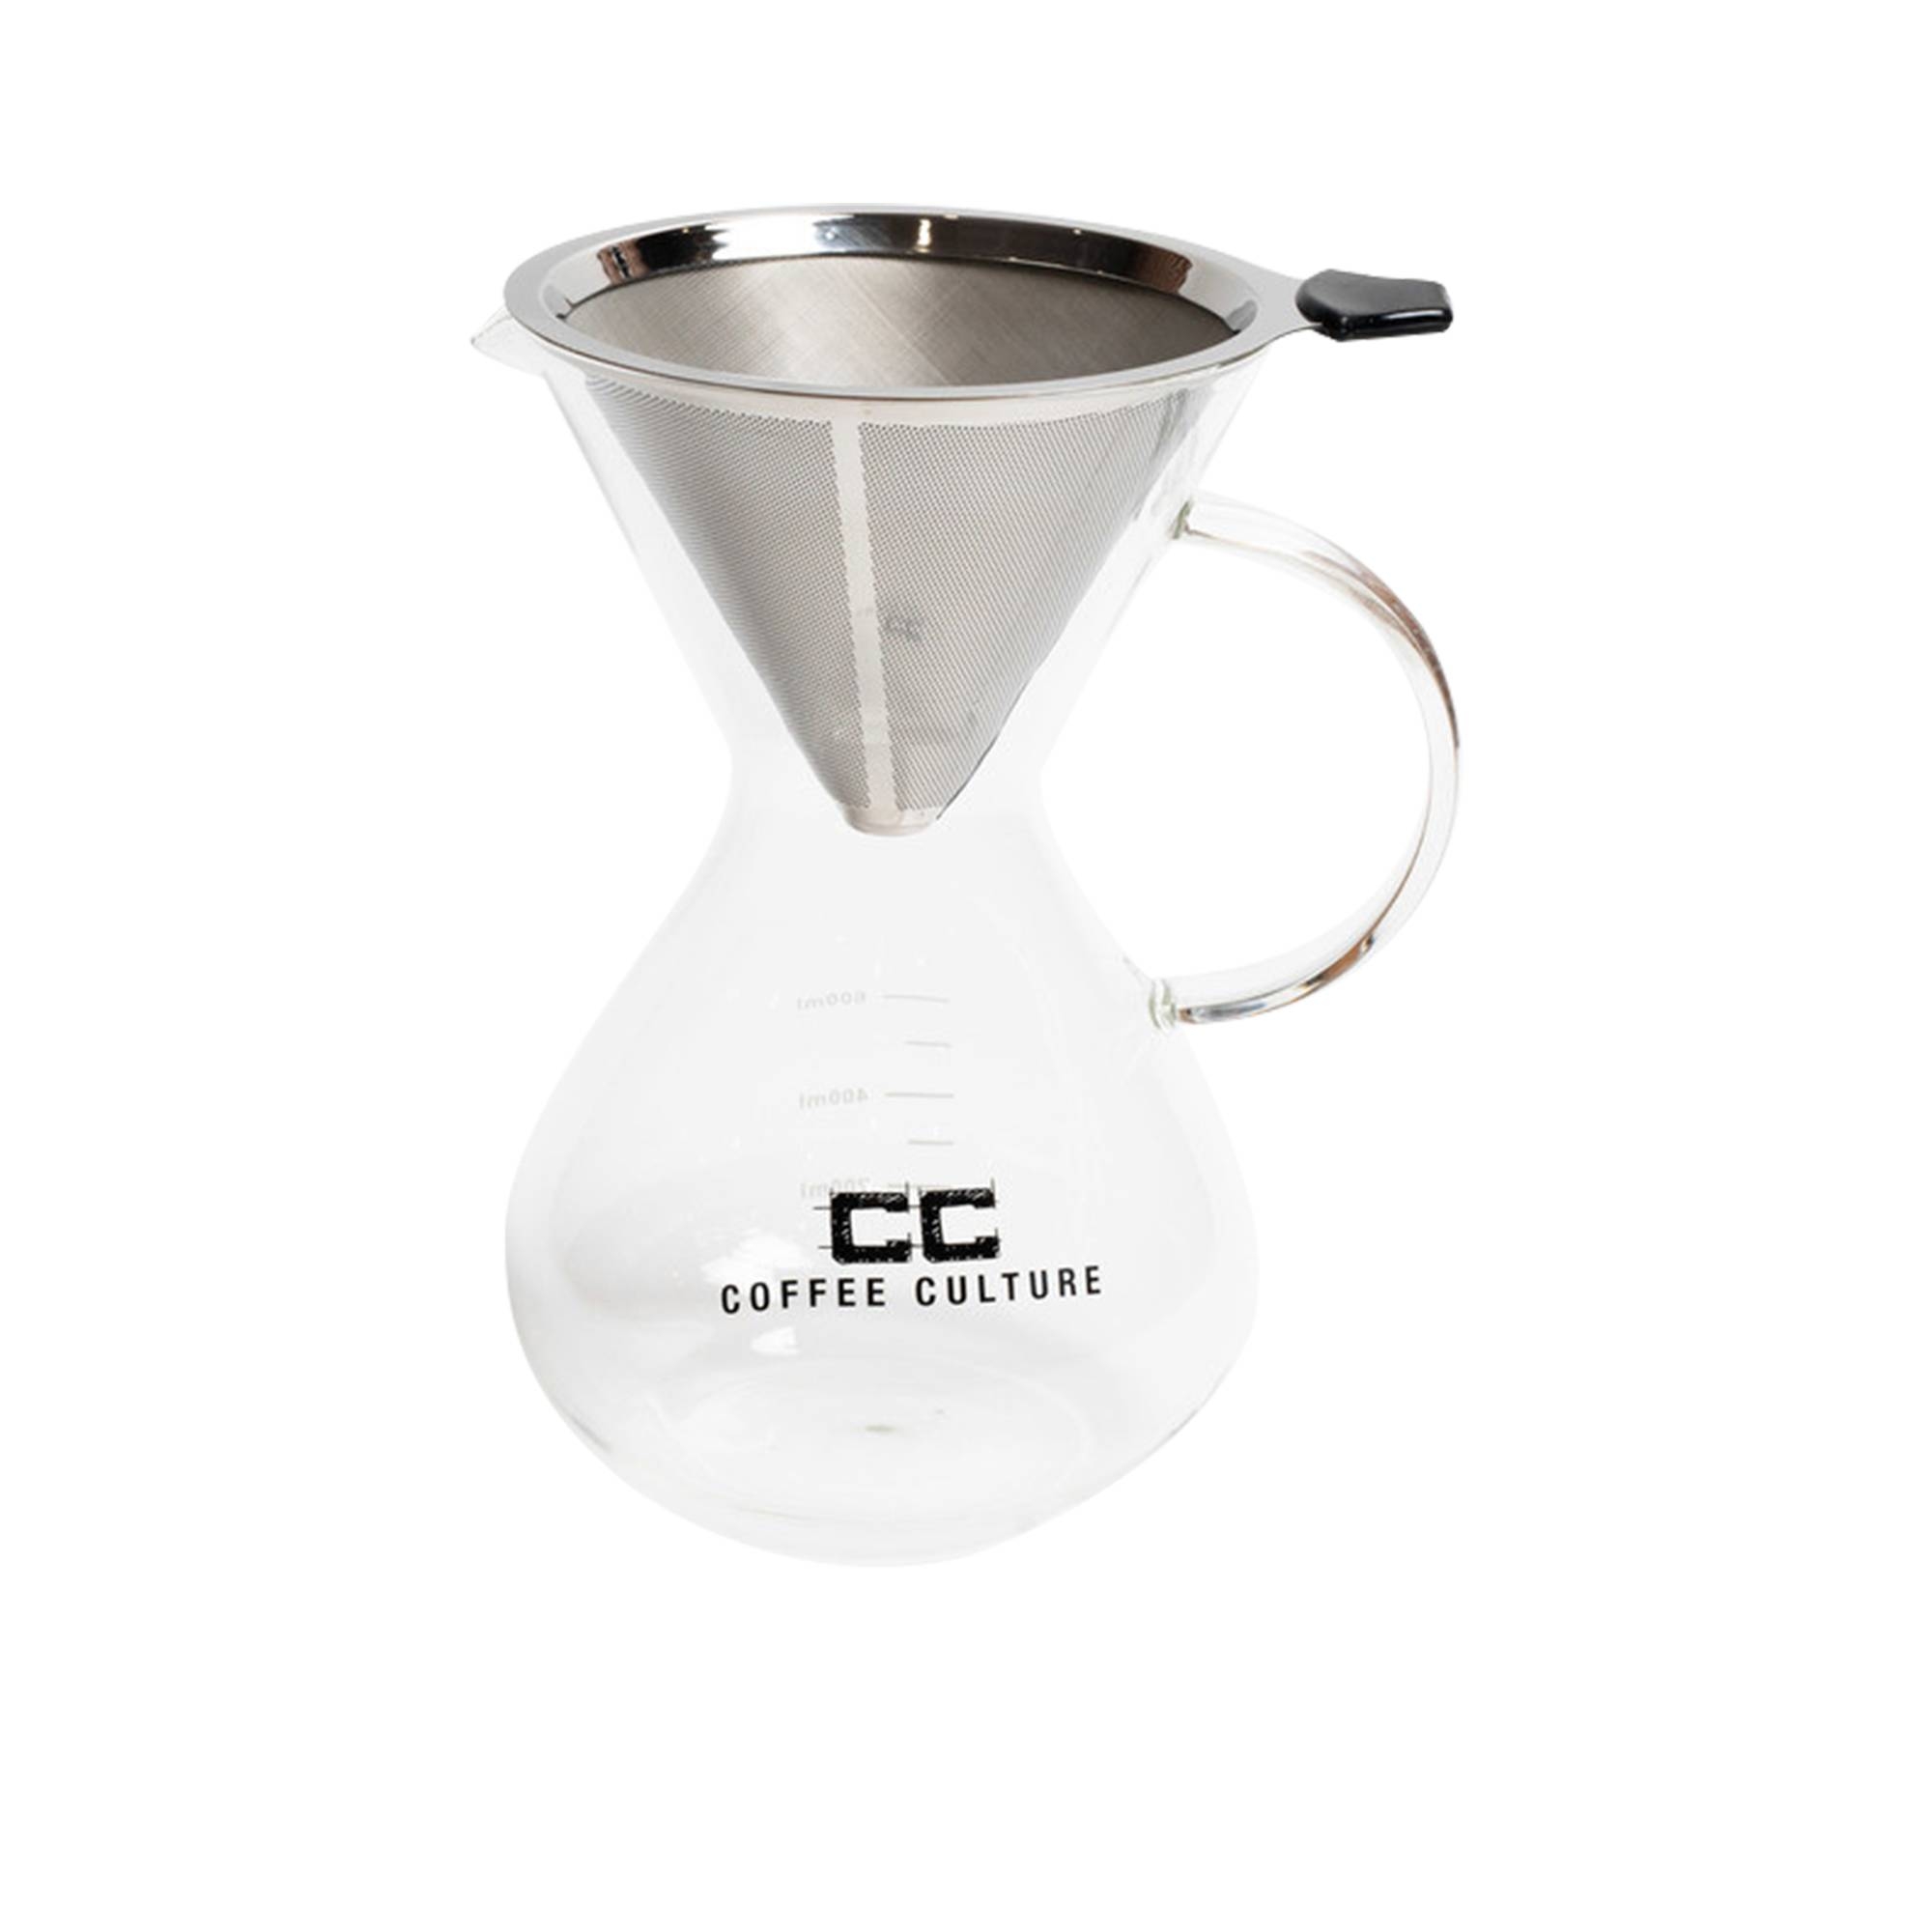 Coffee Culture Pour Over Coffee Maker 600ml Image 1